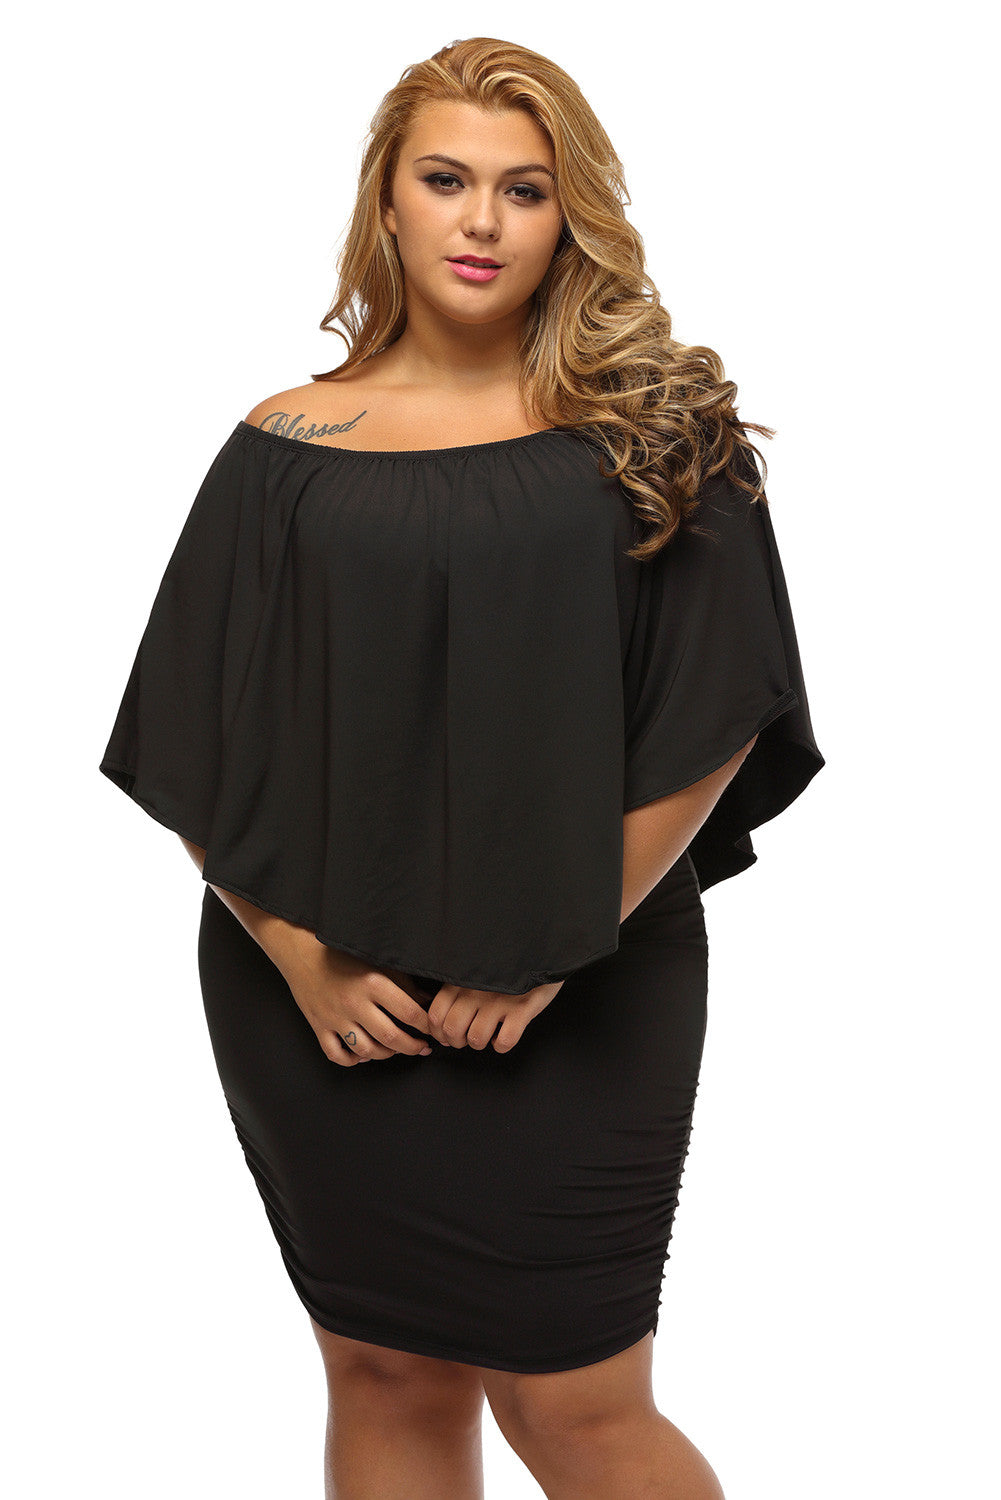 Robe Grande Taille Noire Court Collerette Epaules Denudees